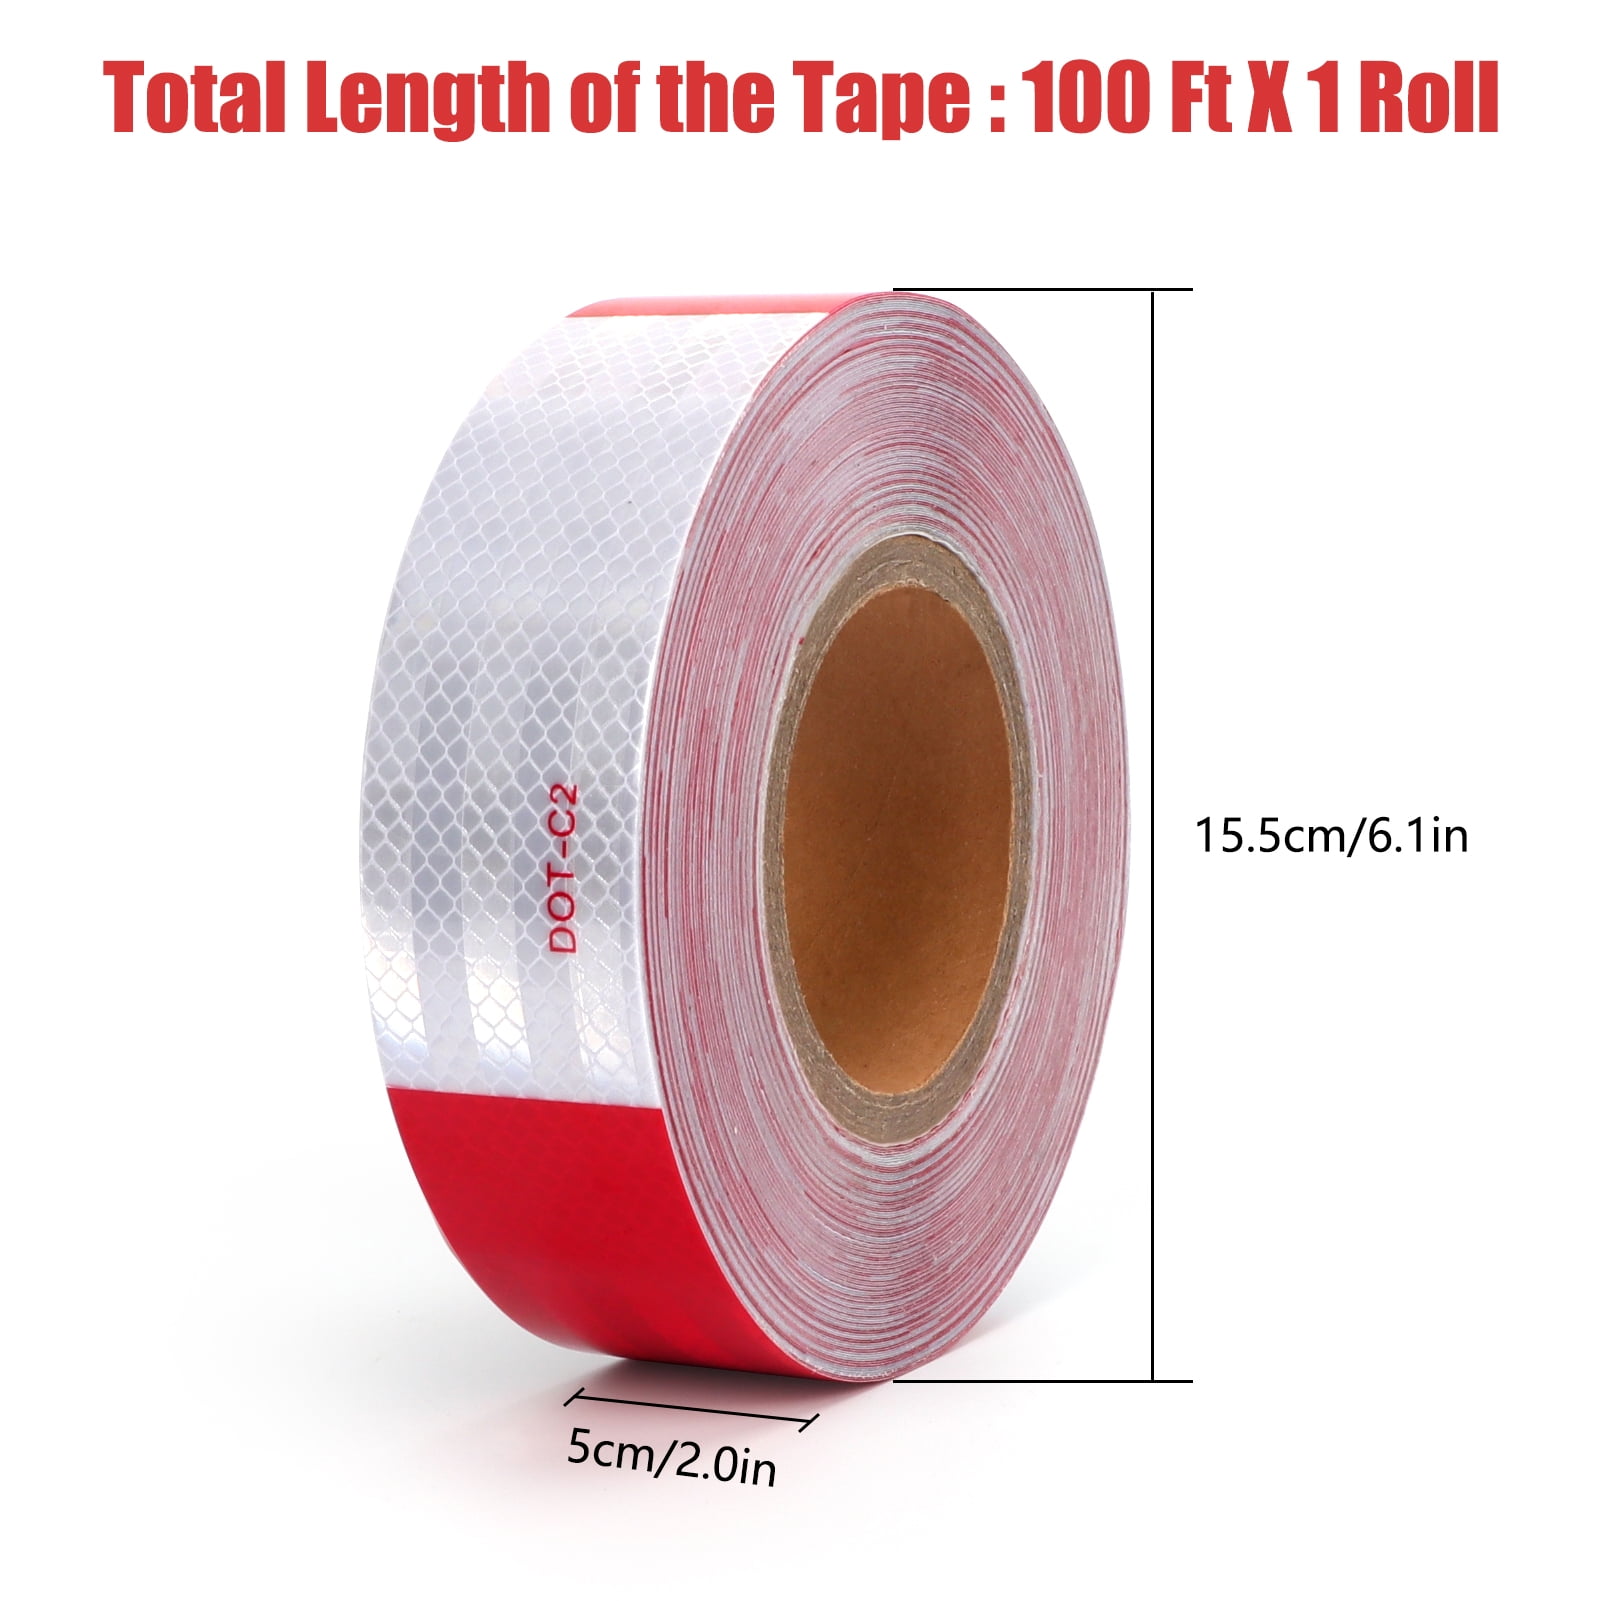 WWW DOT-C2 Reflective Safety Tape 2 In x 100 FT Red White Waterproof Self  Adhesive Trailer Tape Outdoor Safety Caution Reflector Conspuicy for  Vehicles (1Roll x 100 FT) 